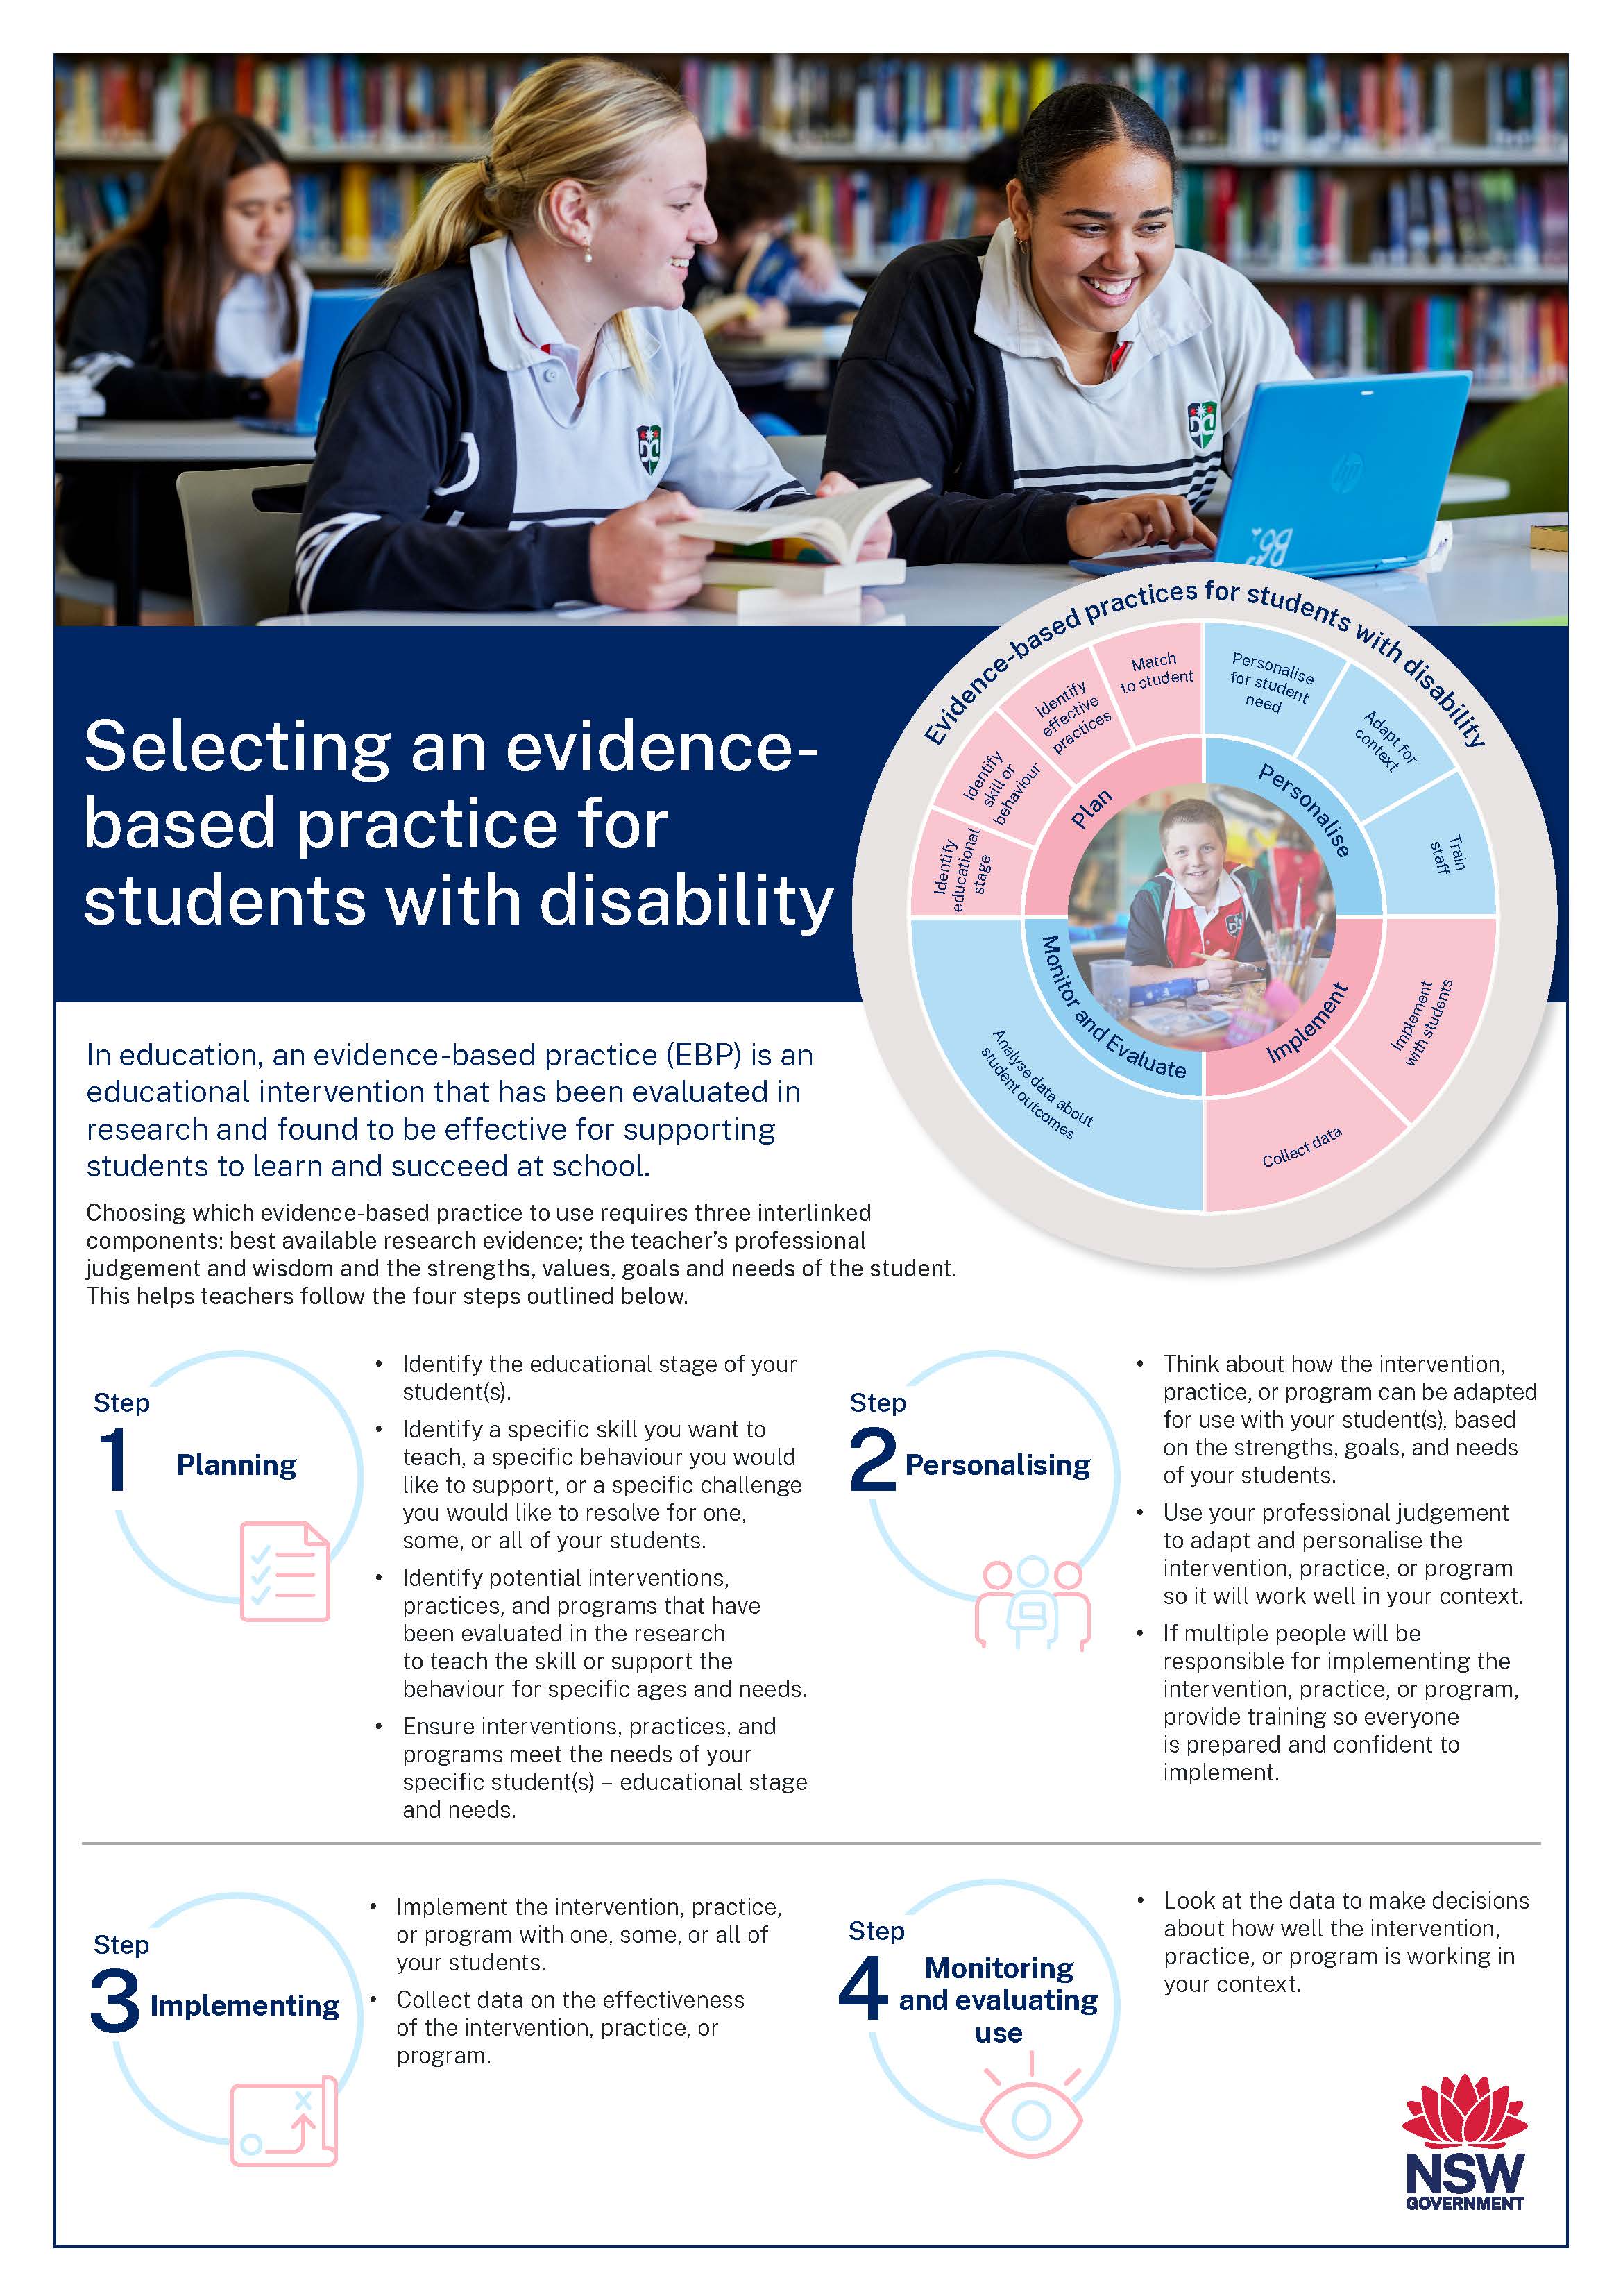 poster about evidence-based practices